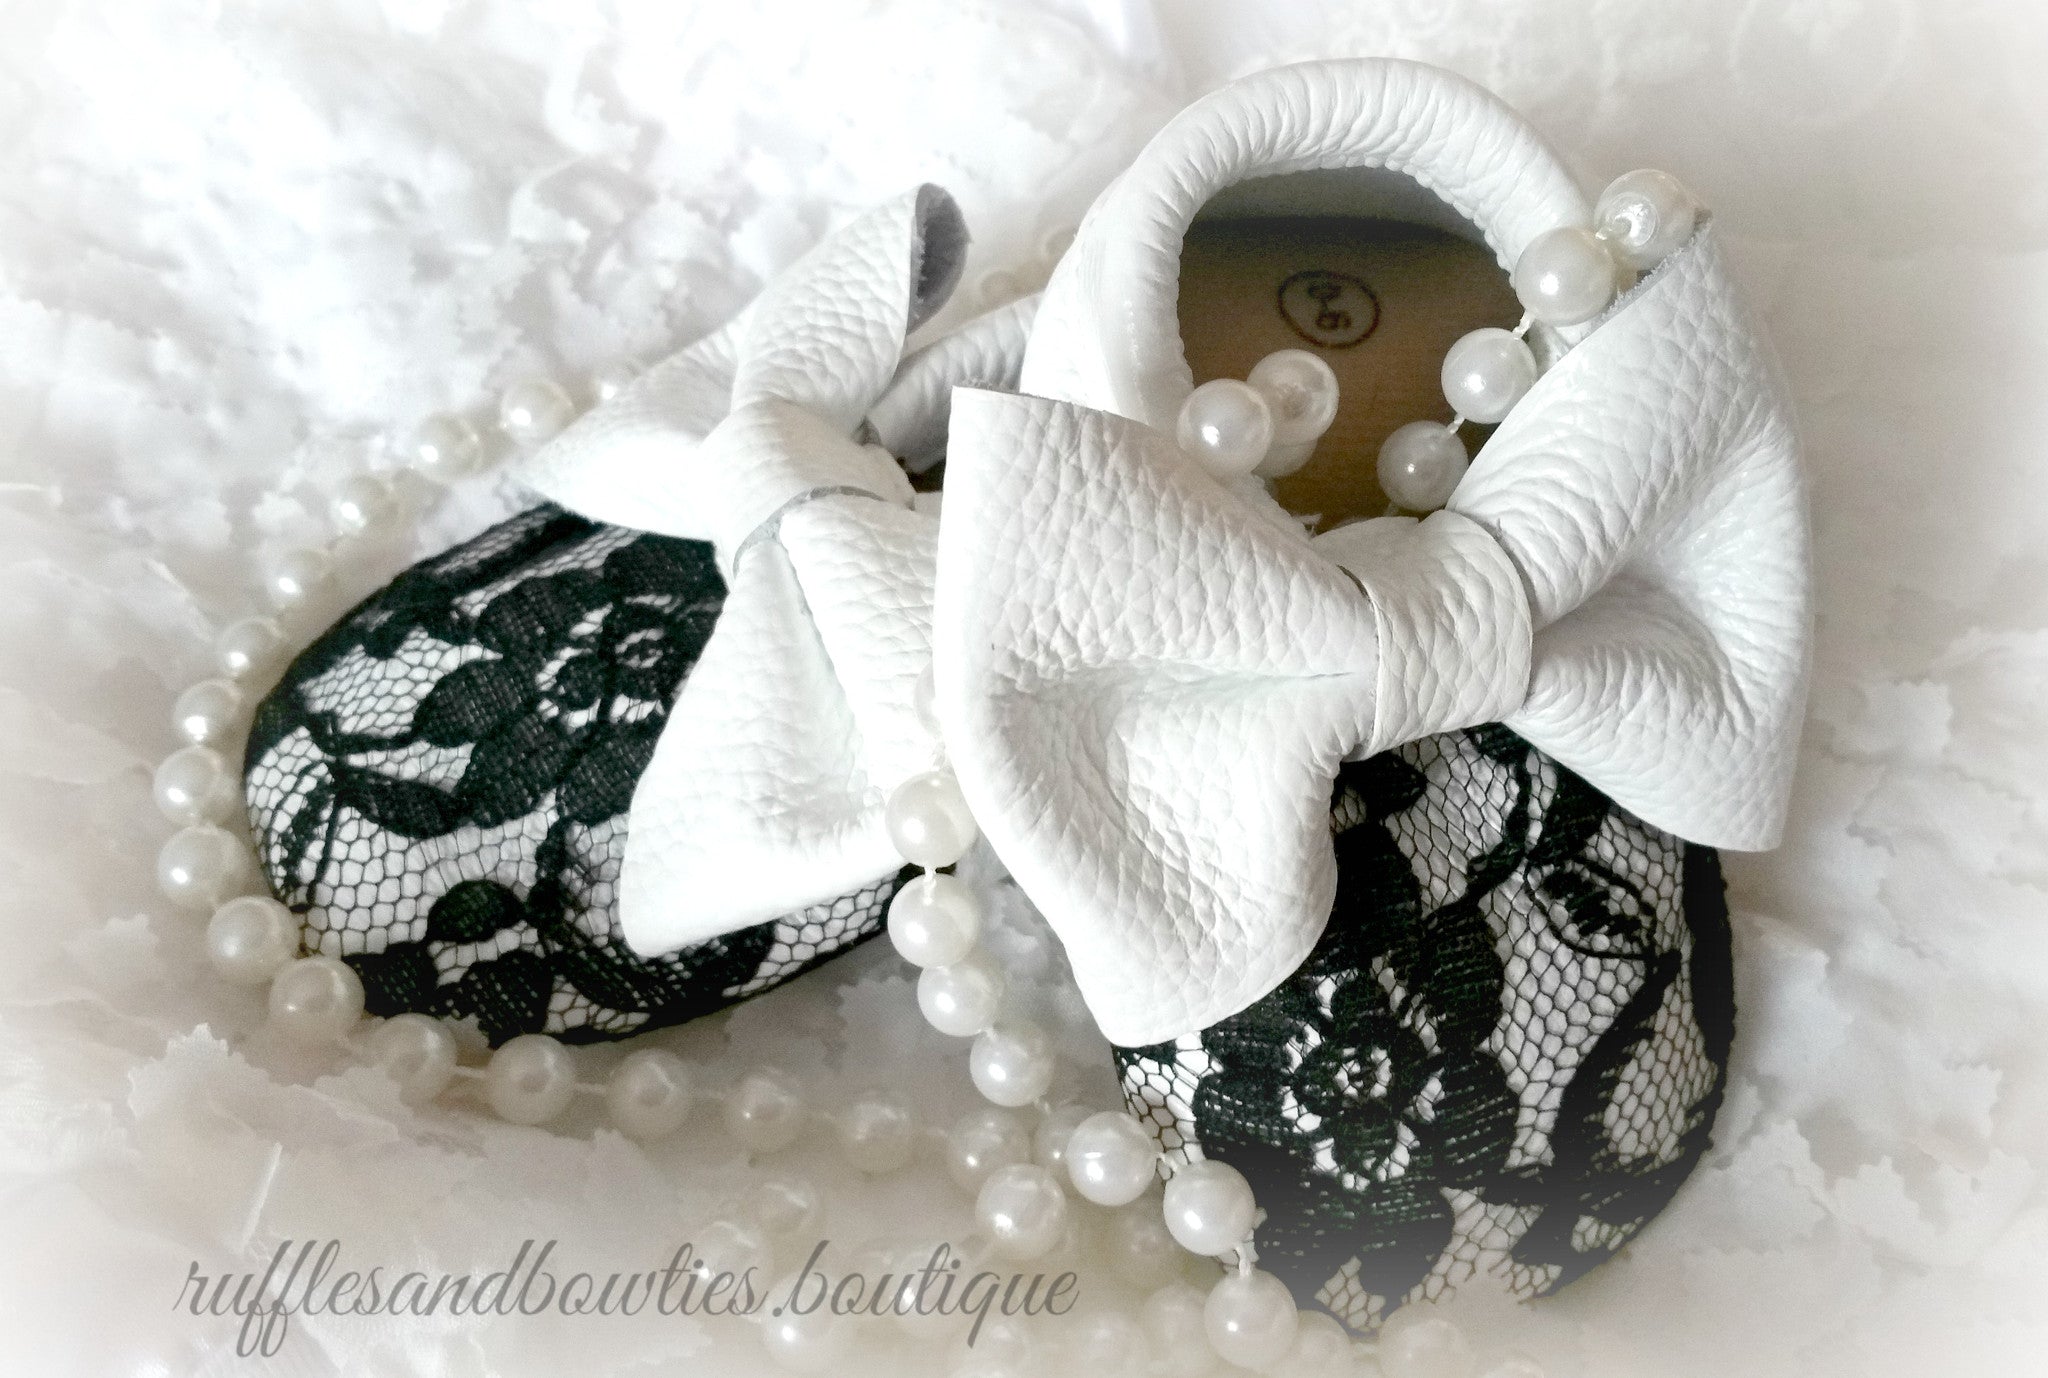  Baby Girl Lace leather Moccaisns - White  with Black Lace Big Bow Leather Baby Moccasins - Baby Girl Moccasins - Bow Moccasins - Gold Bow Moccasins  - Soft Shoes - Lace Moccasins